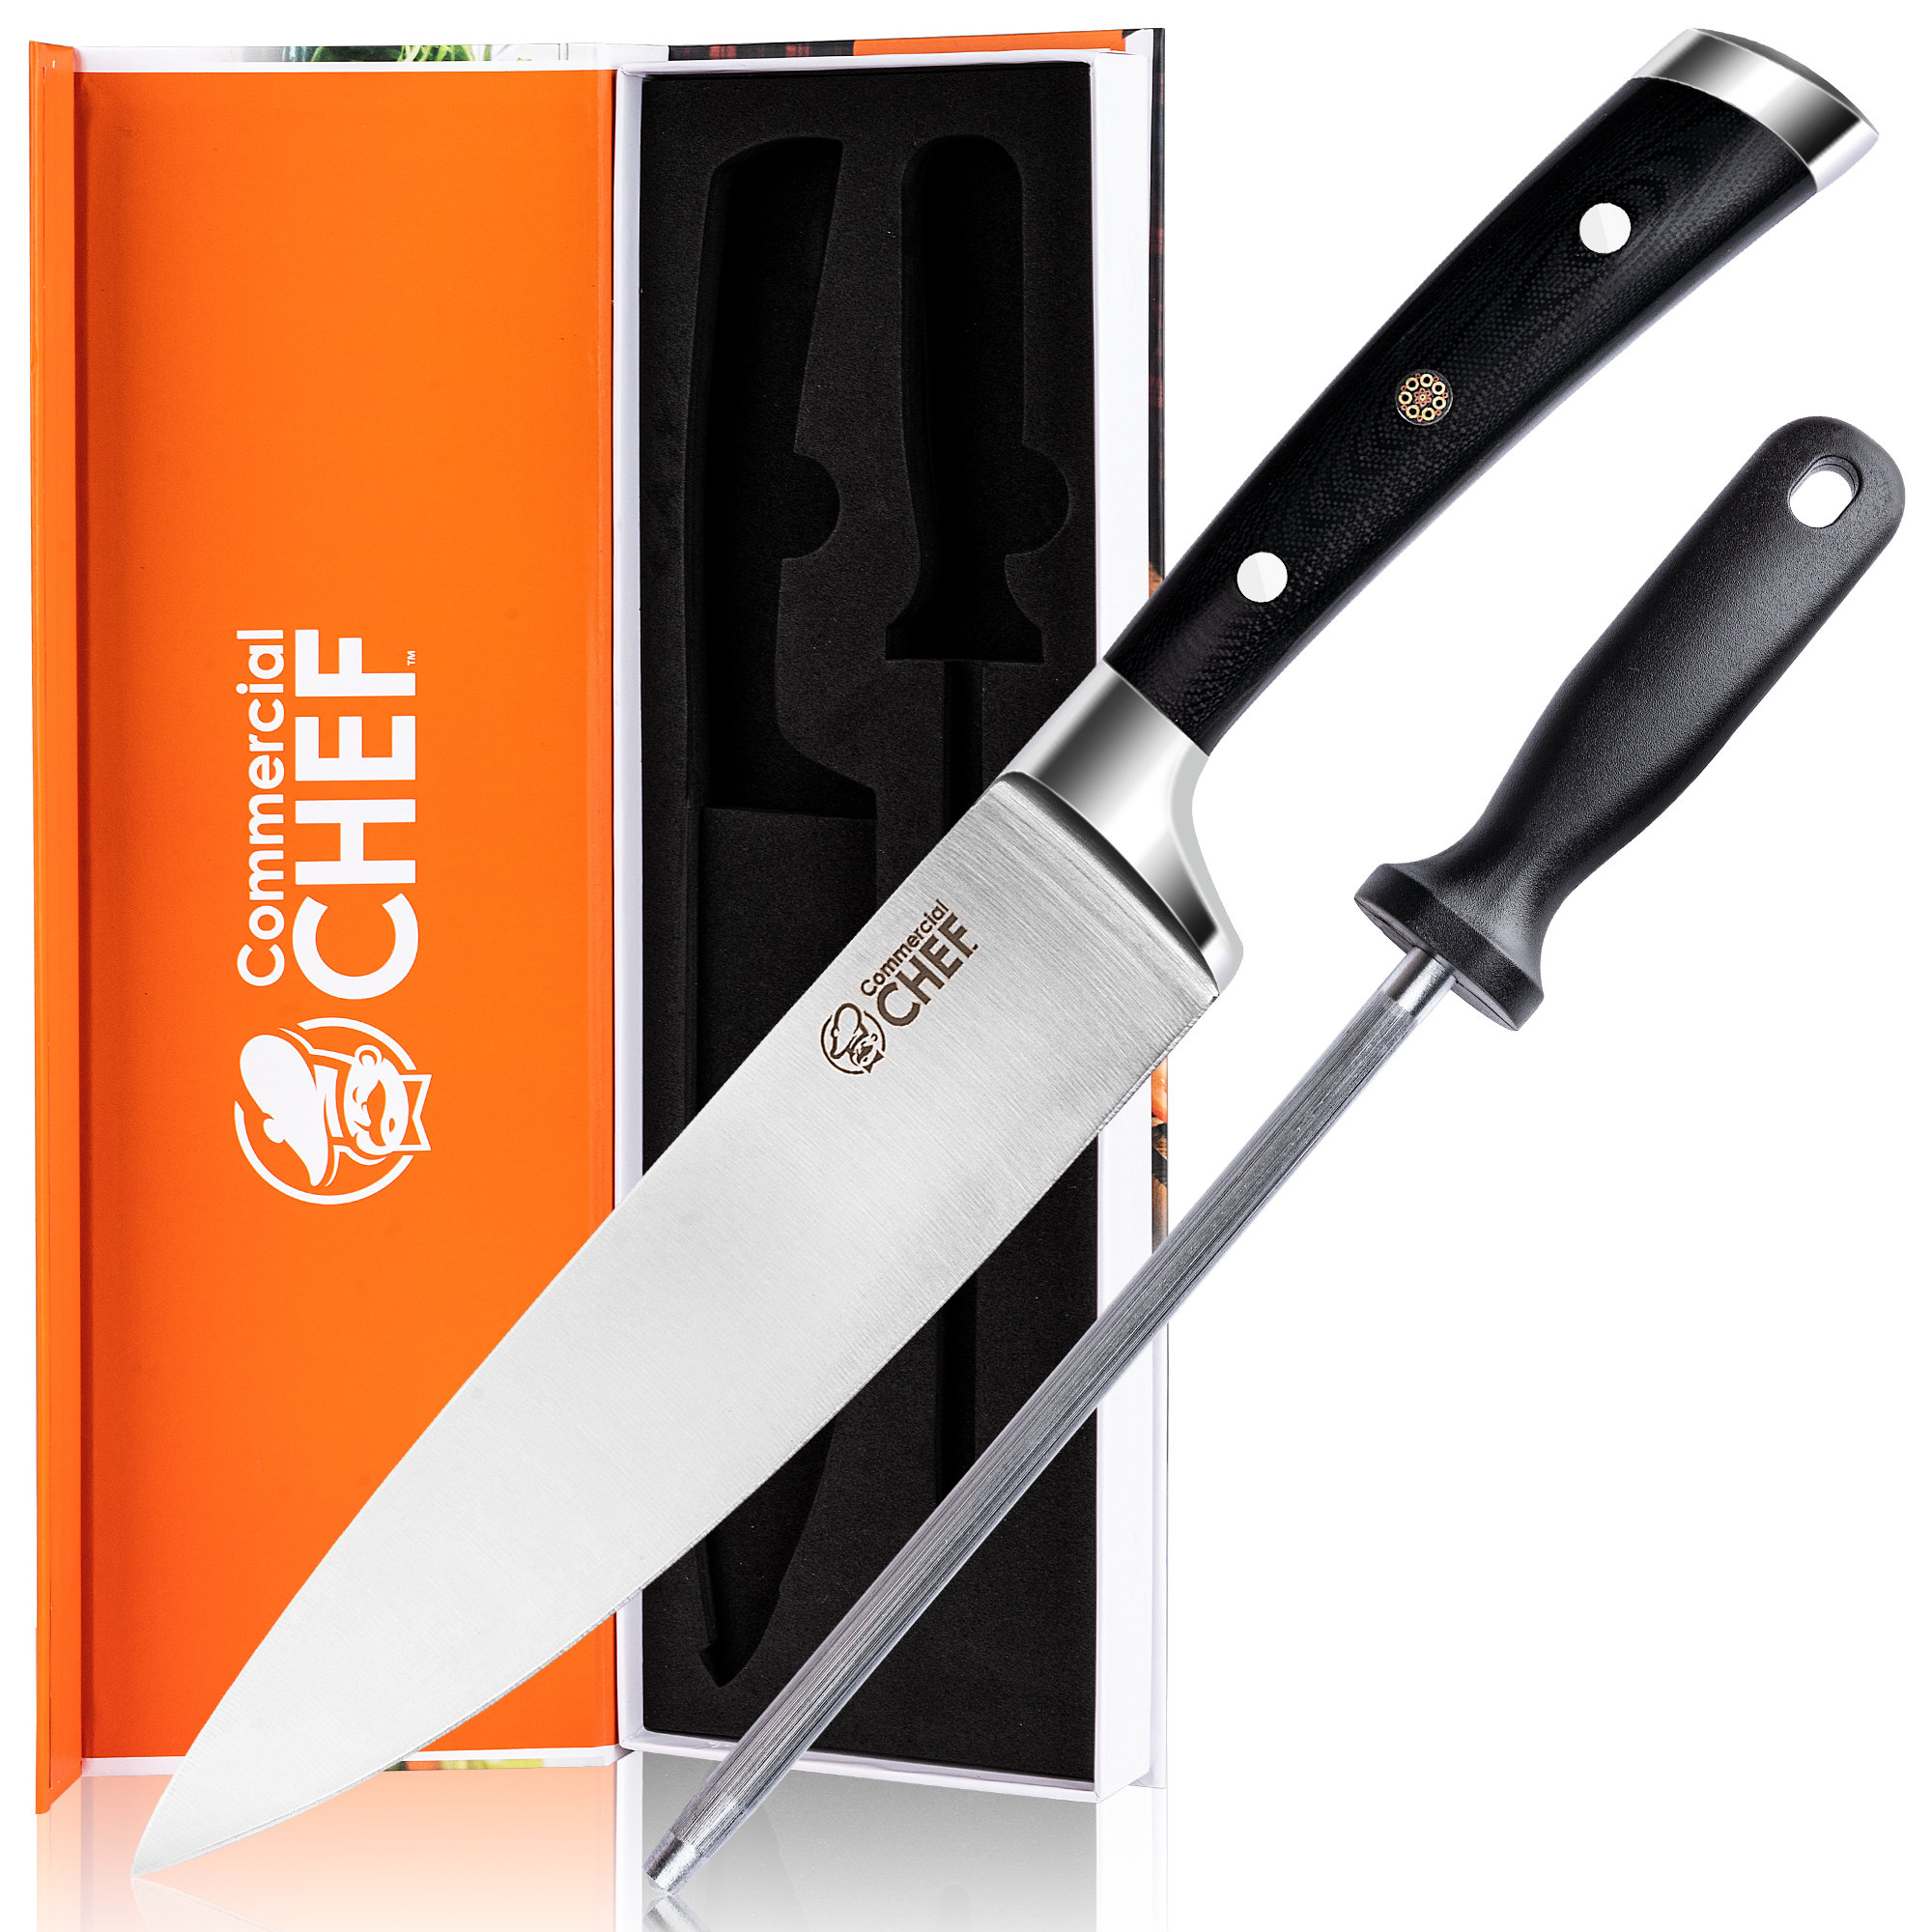 Oklahoma Joe's 2-Piece Carving Knife in the Cutlery department at